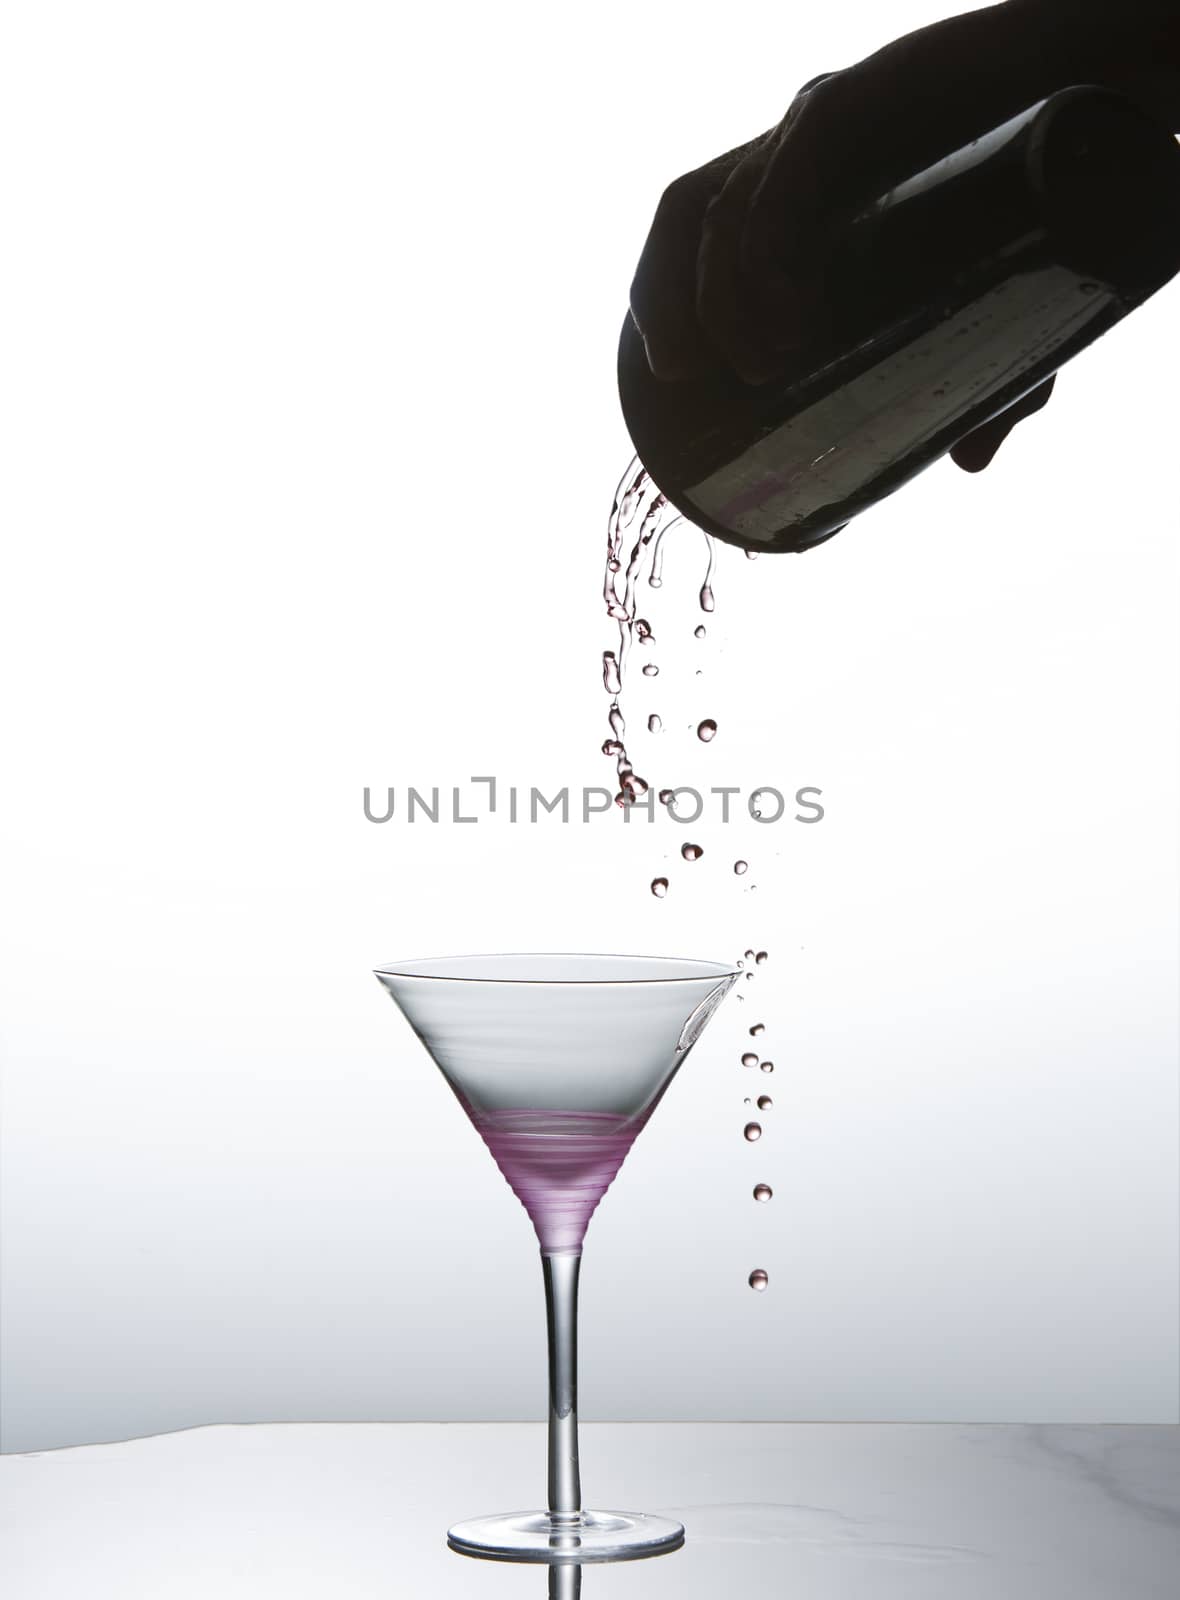 Cocktail being poured into martini glass by Njean